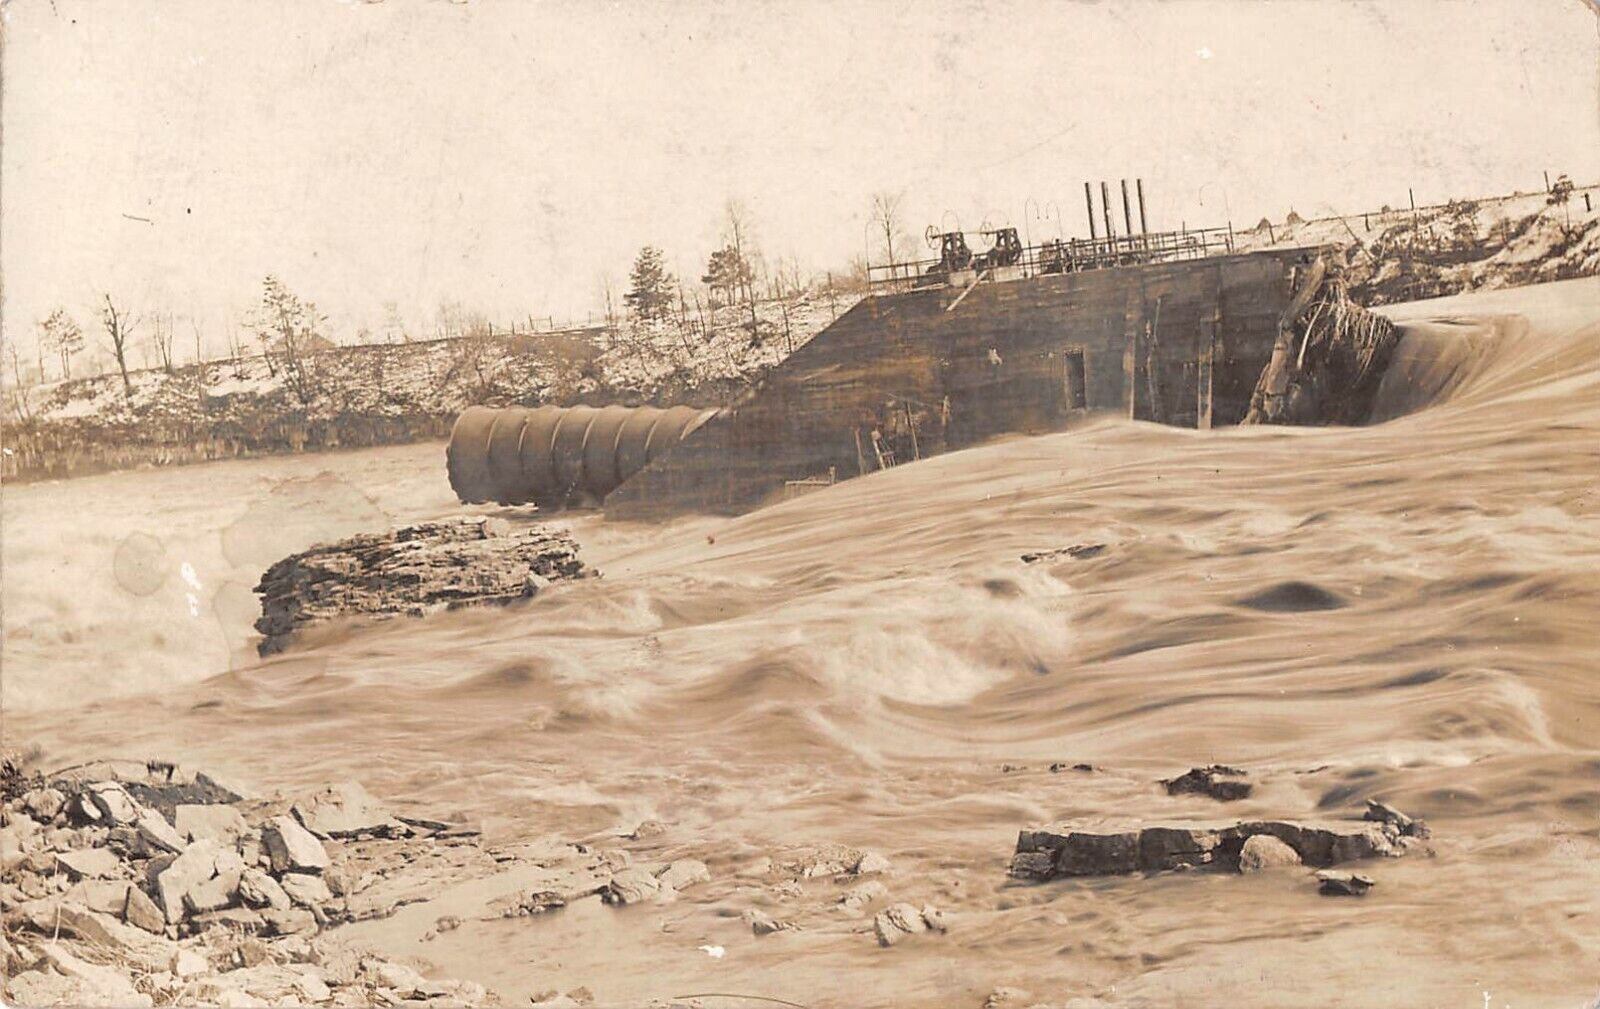 Vtg 1910's RPPC Photo of Flooding from Collapsed Dam Postcard